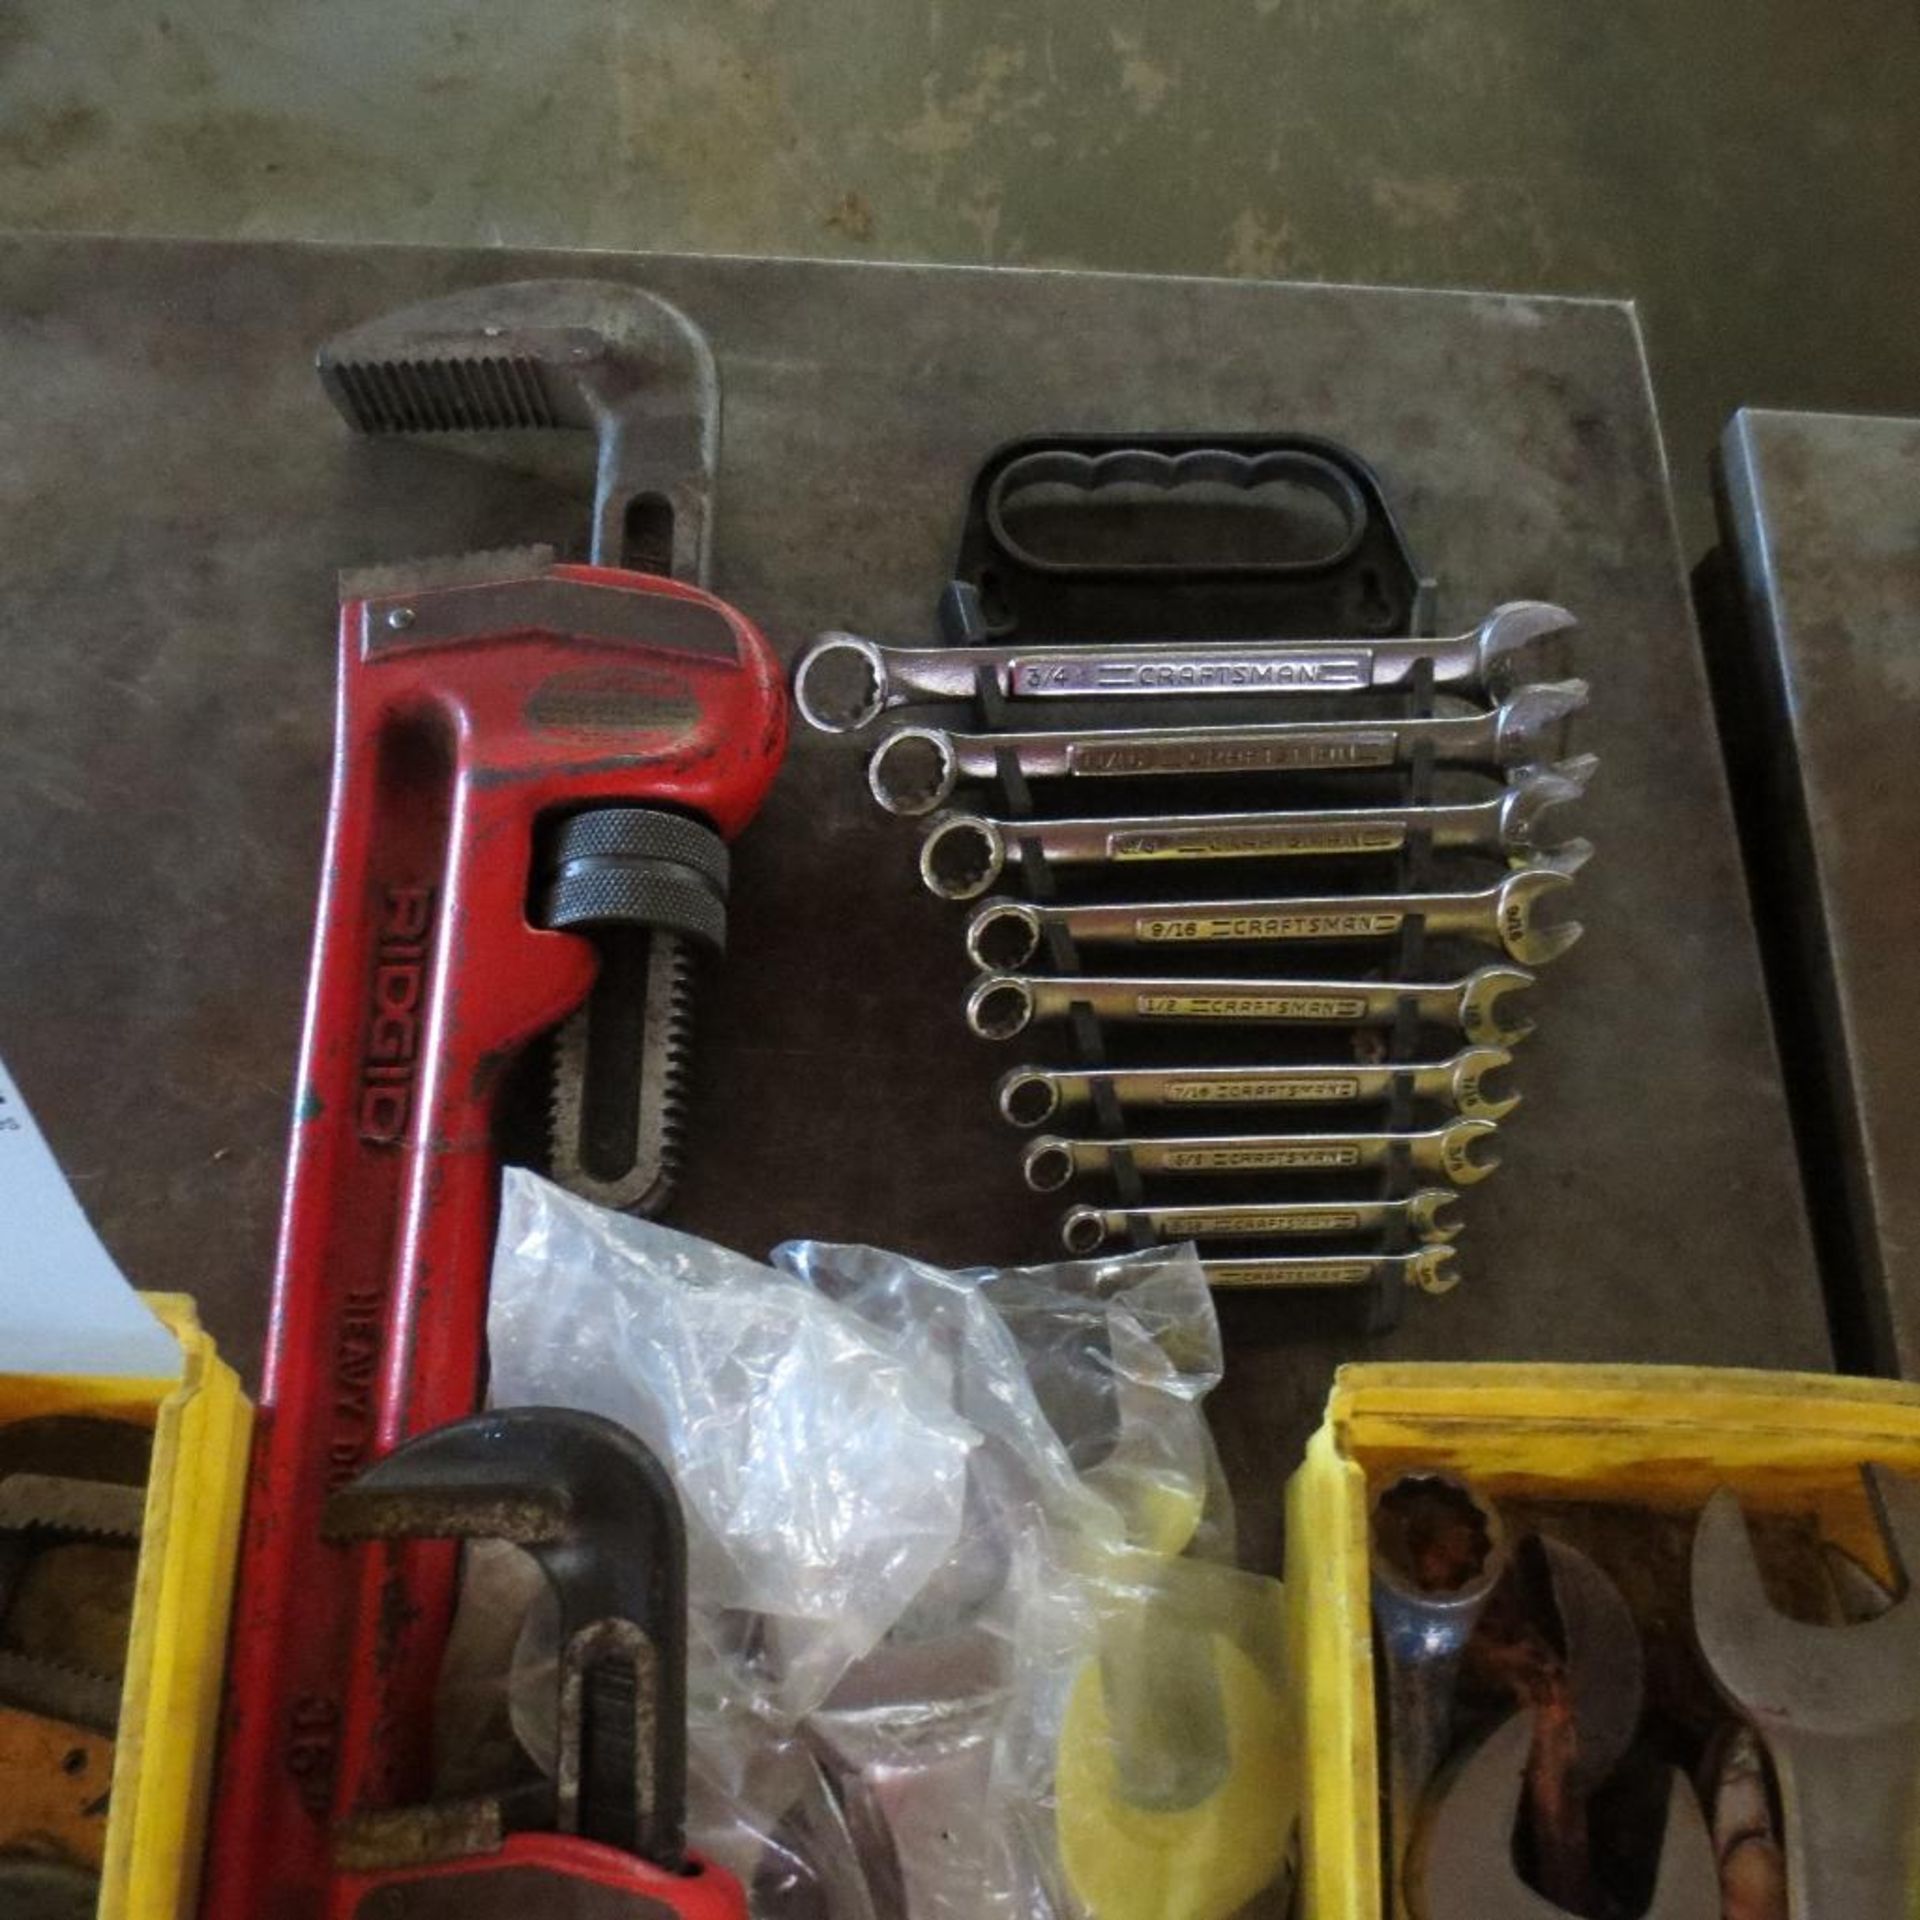 Vice Grips, Pipe Wrenches and Wrenches - Image 4 of 4